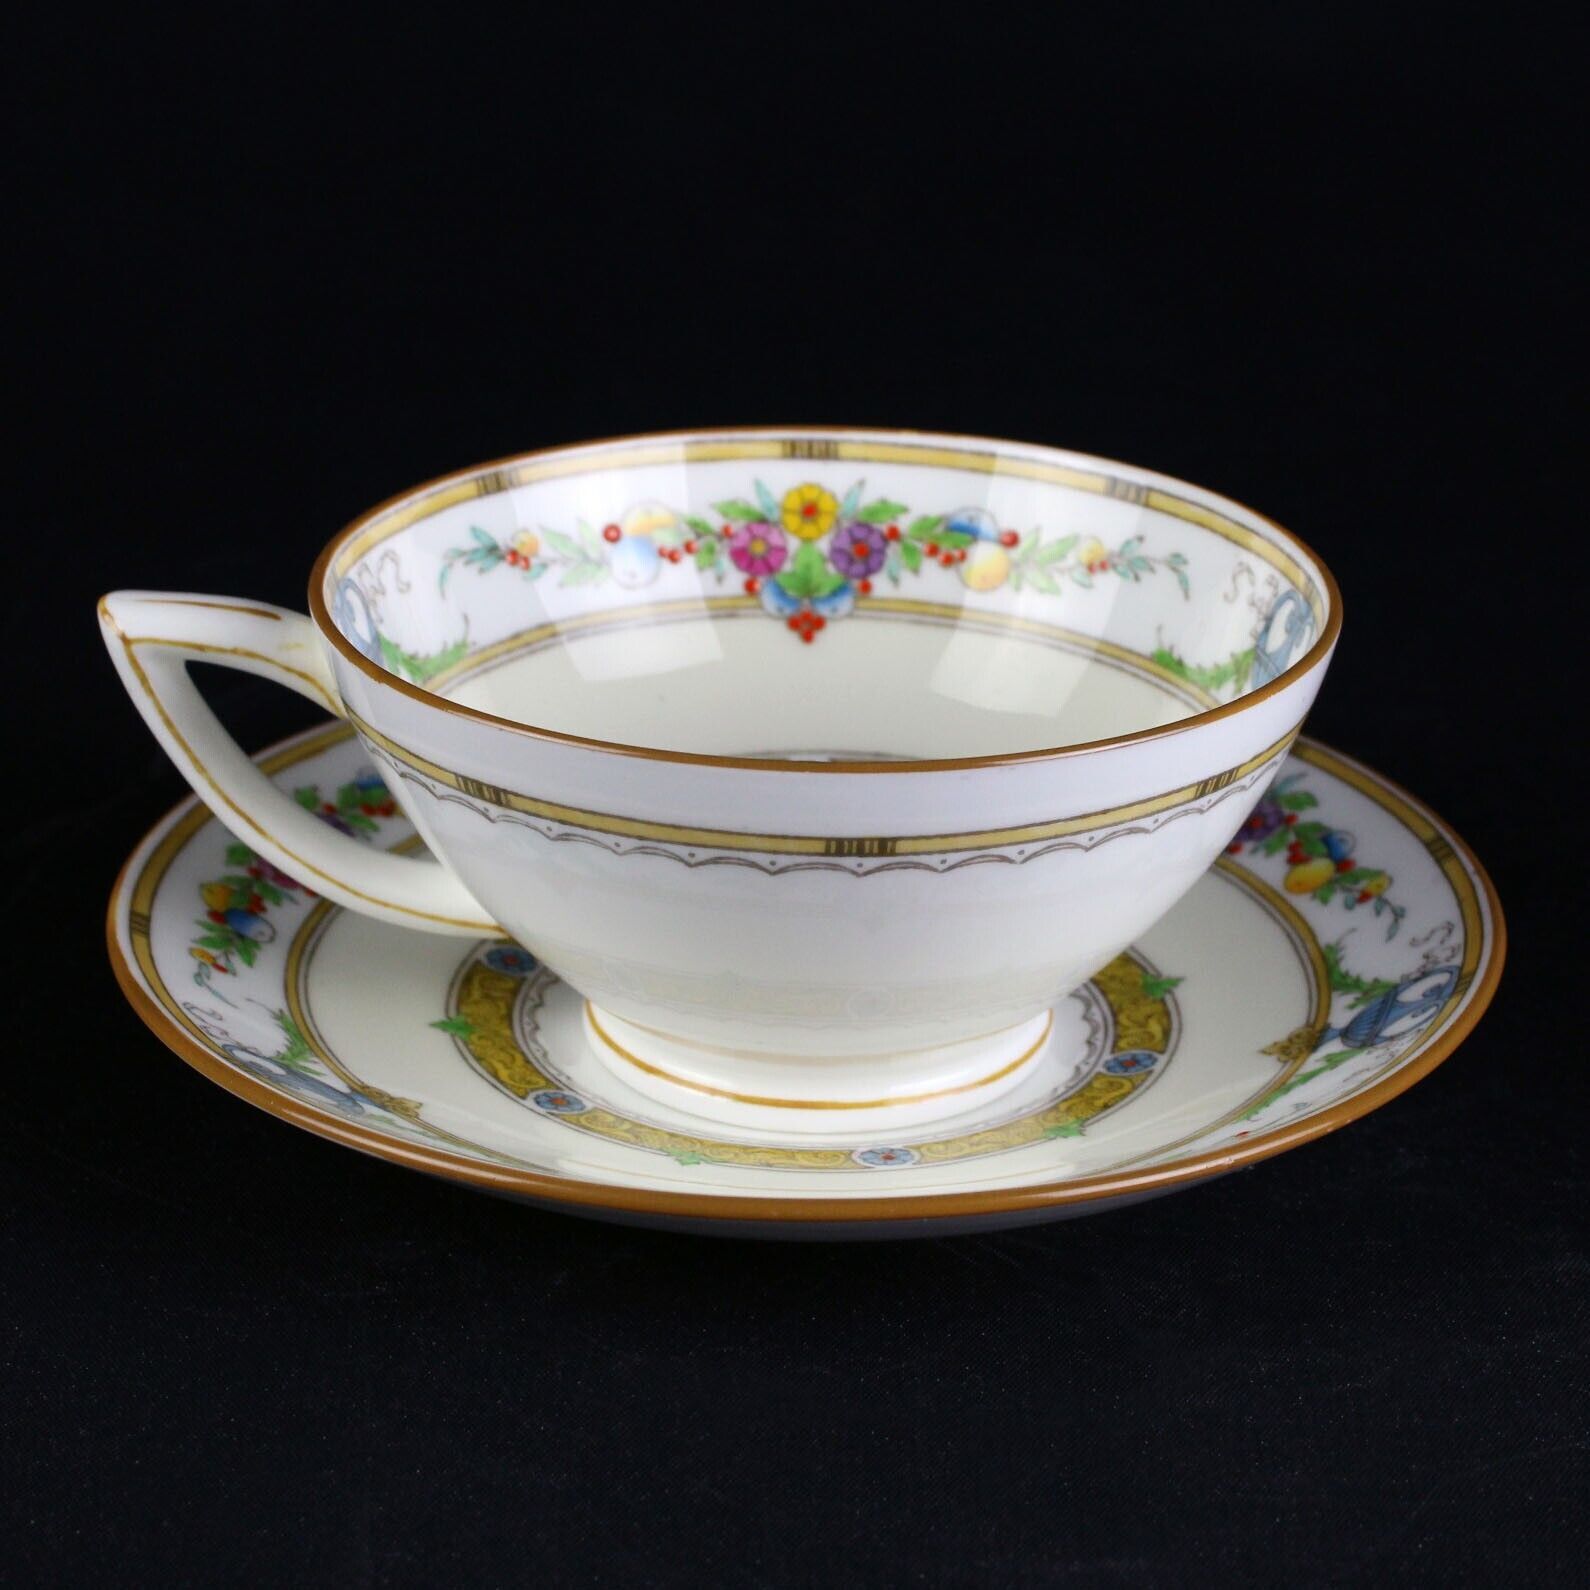 Primary image for Minton Helena Yellow Tea Cup and Saucer Set, Vintage c1920s England Bone China